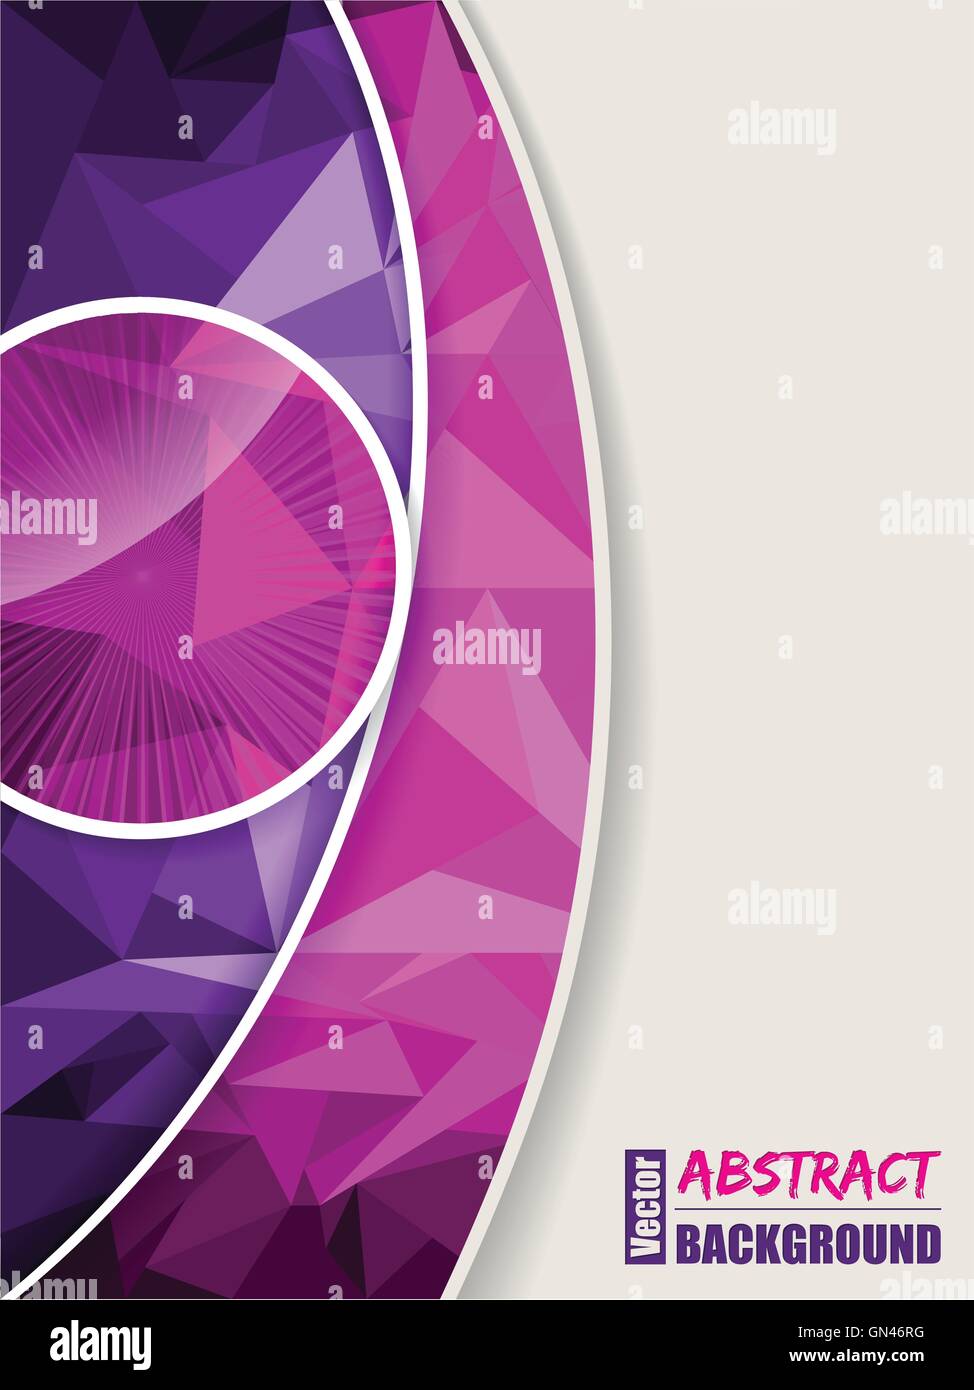 Abstract pink purple brochure with polygons Stock Vector